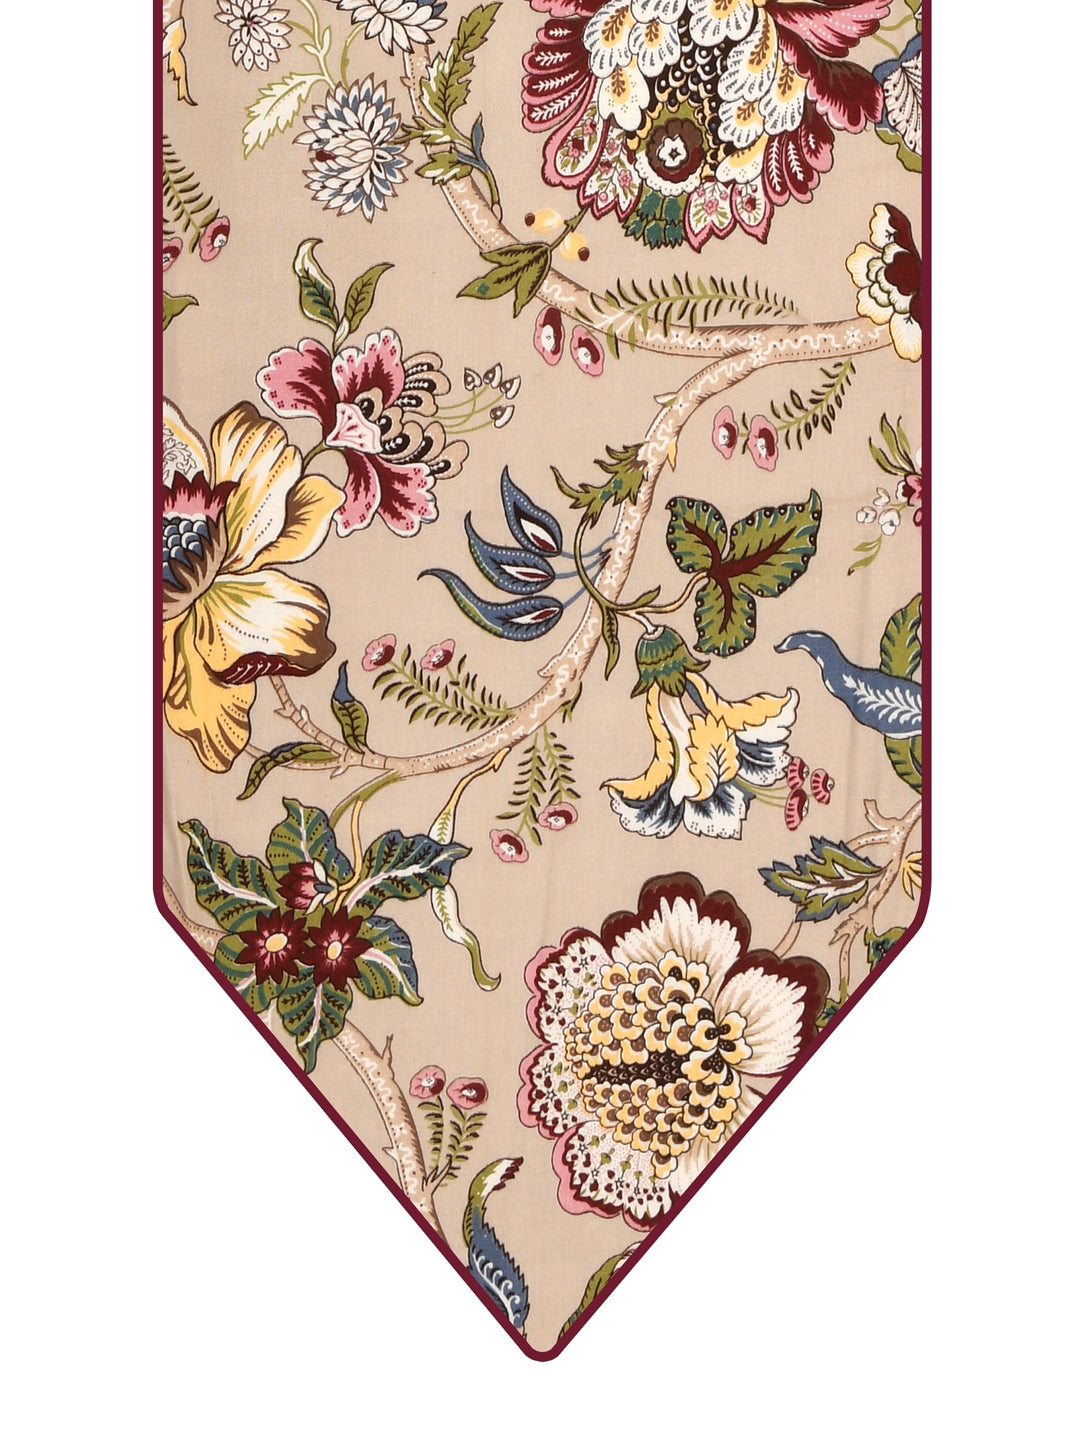 Table Runner; 14x72 Inches; Multicolor Flowers